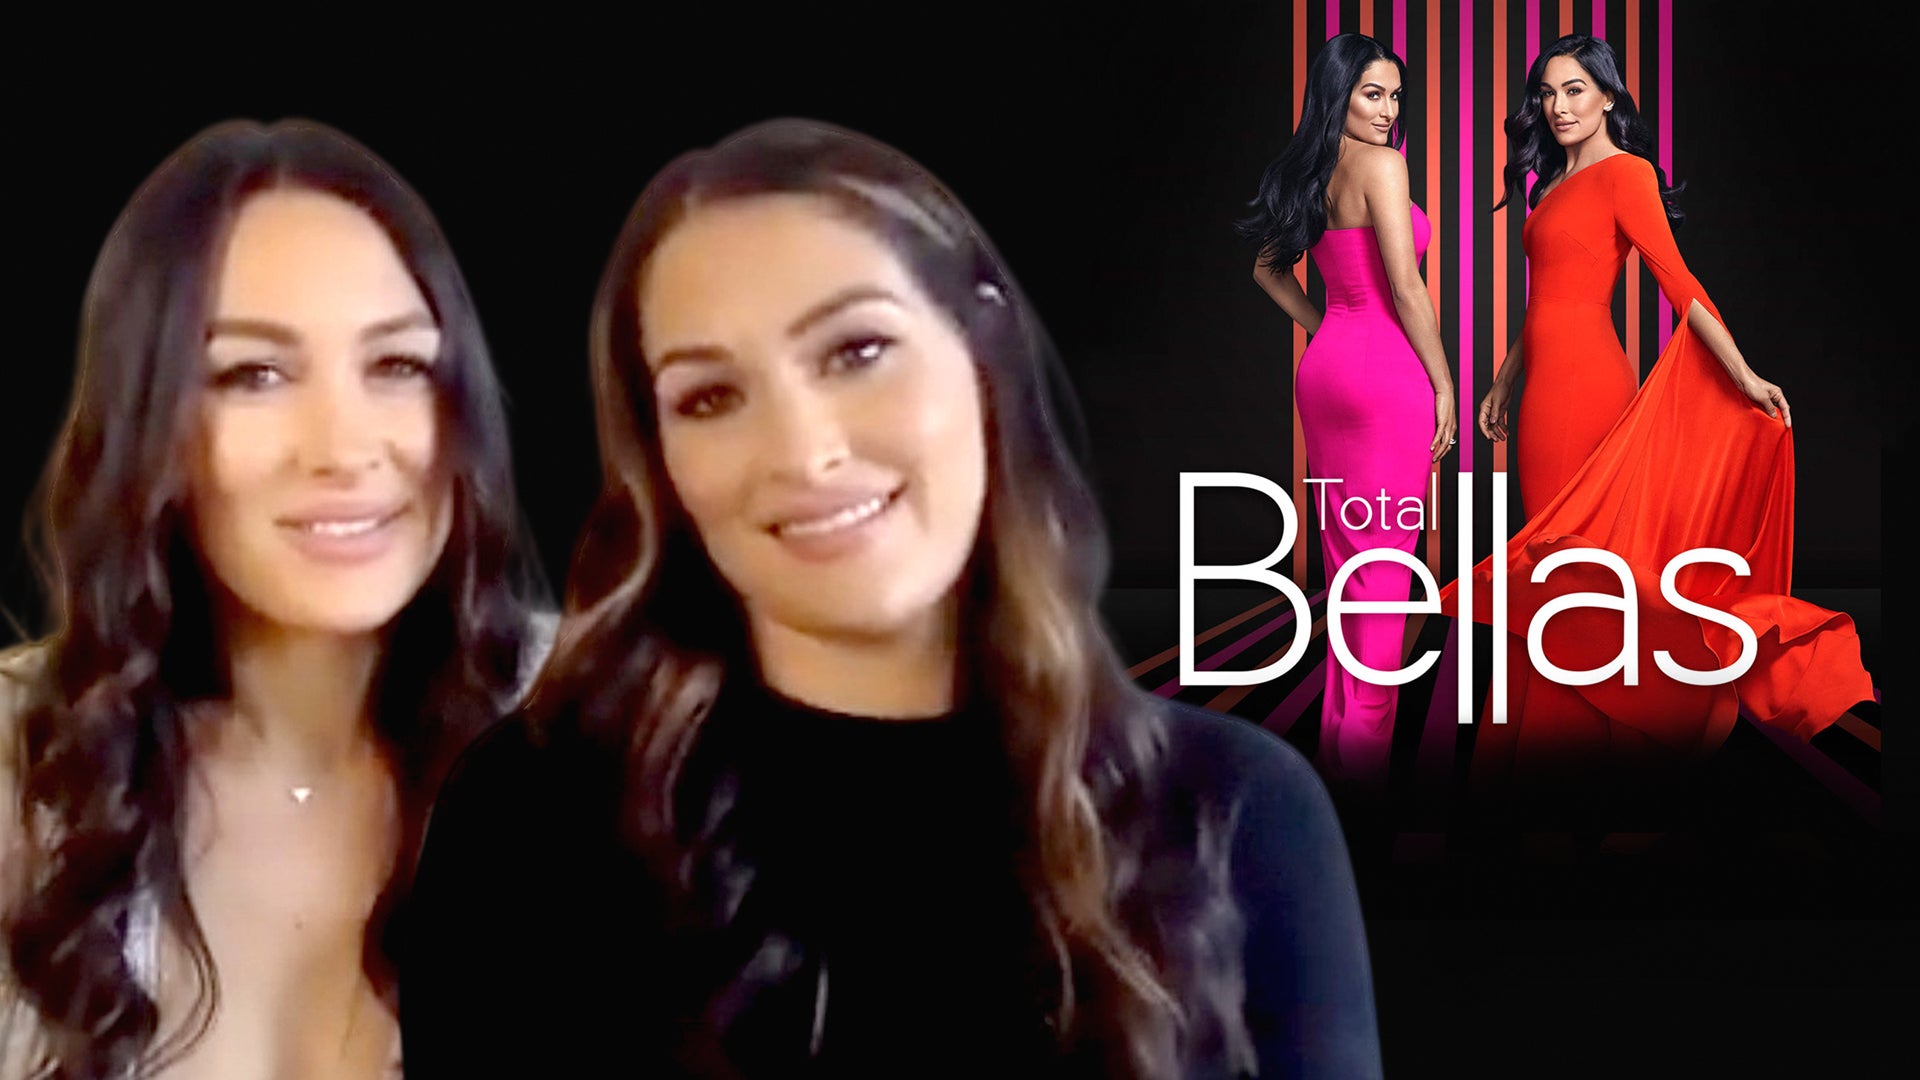 Nikki Bella Says I Do: Clothes, Outfits, Brands, Style and Looks